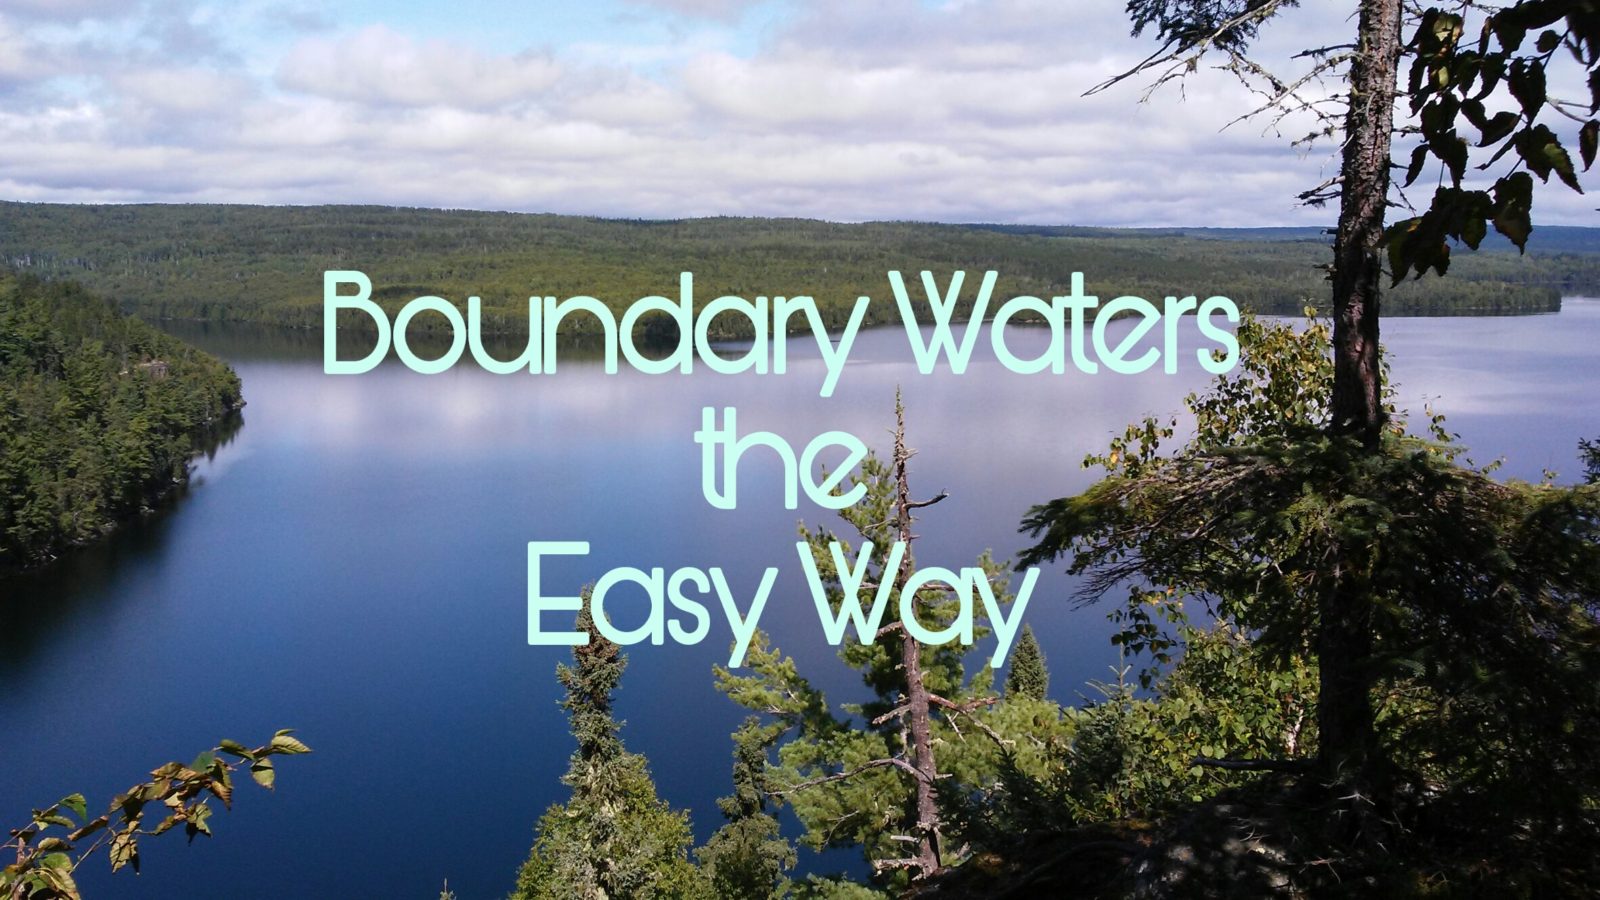 Boundary Waters the Easy Way